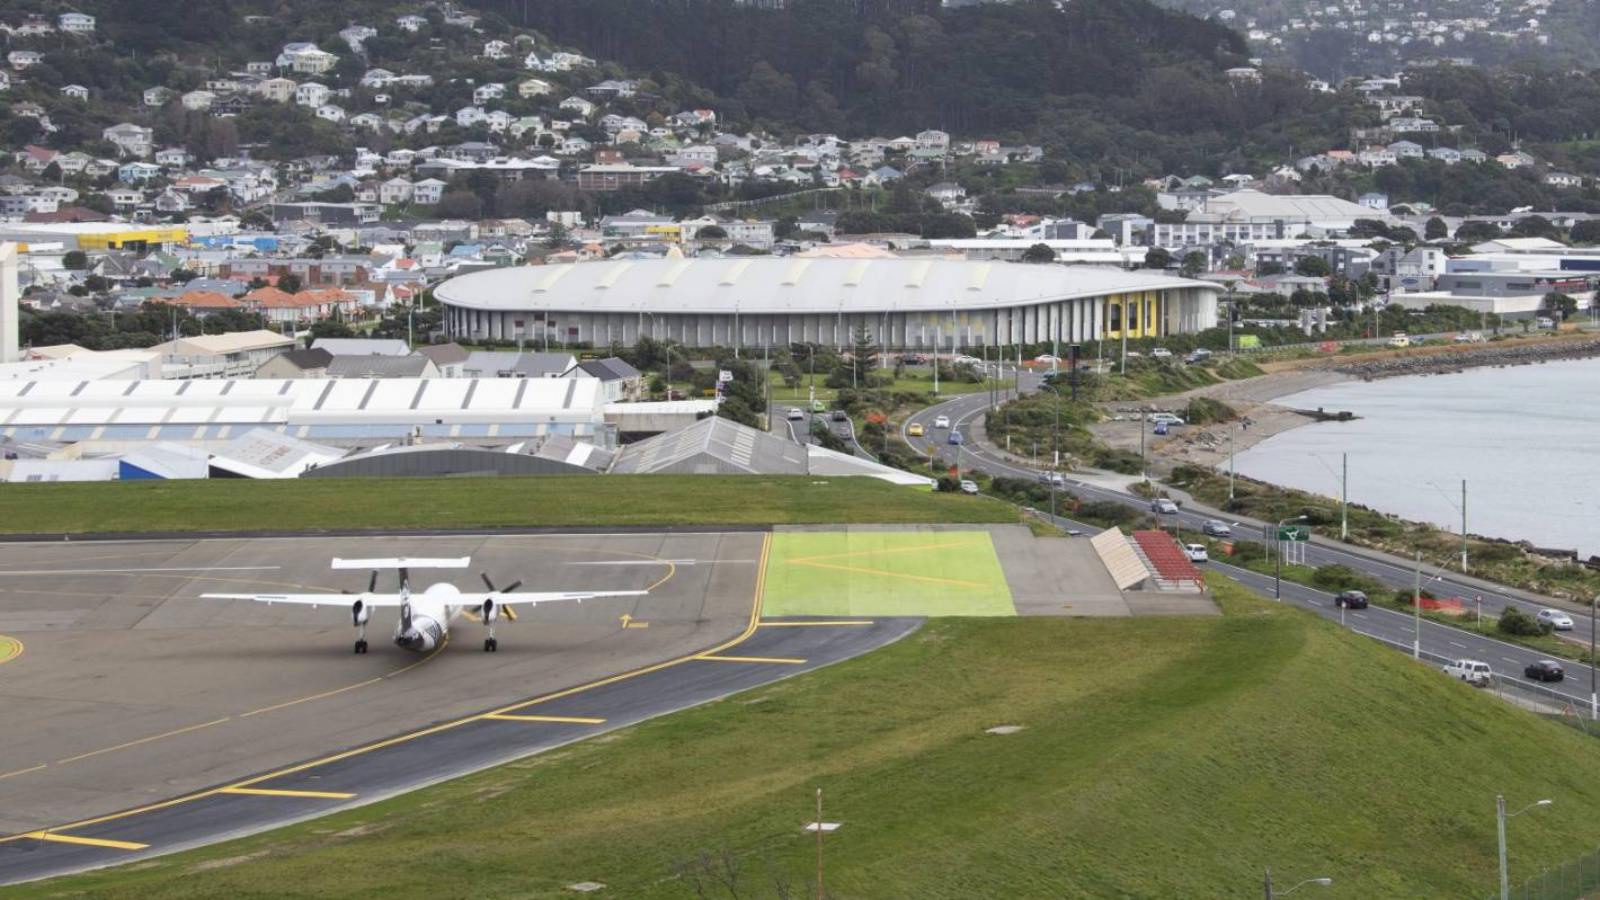 Drone causes Wellington Airport to temporarily shut down